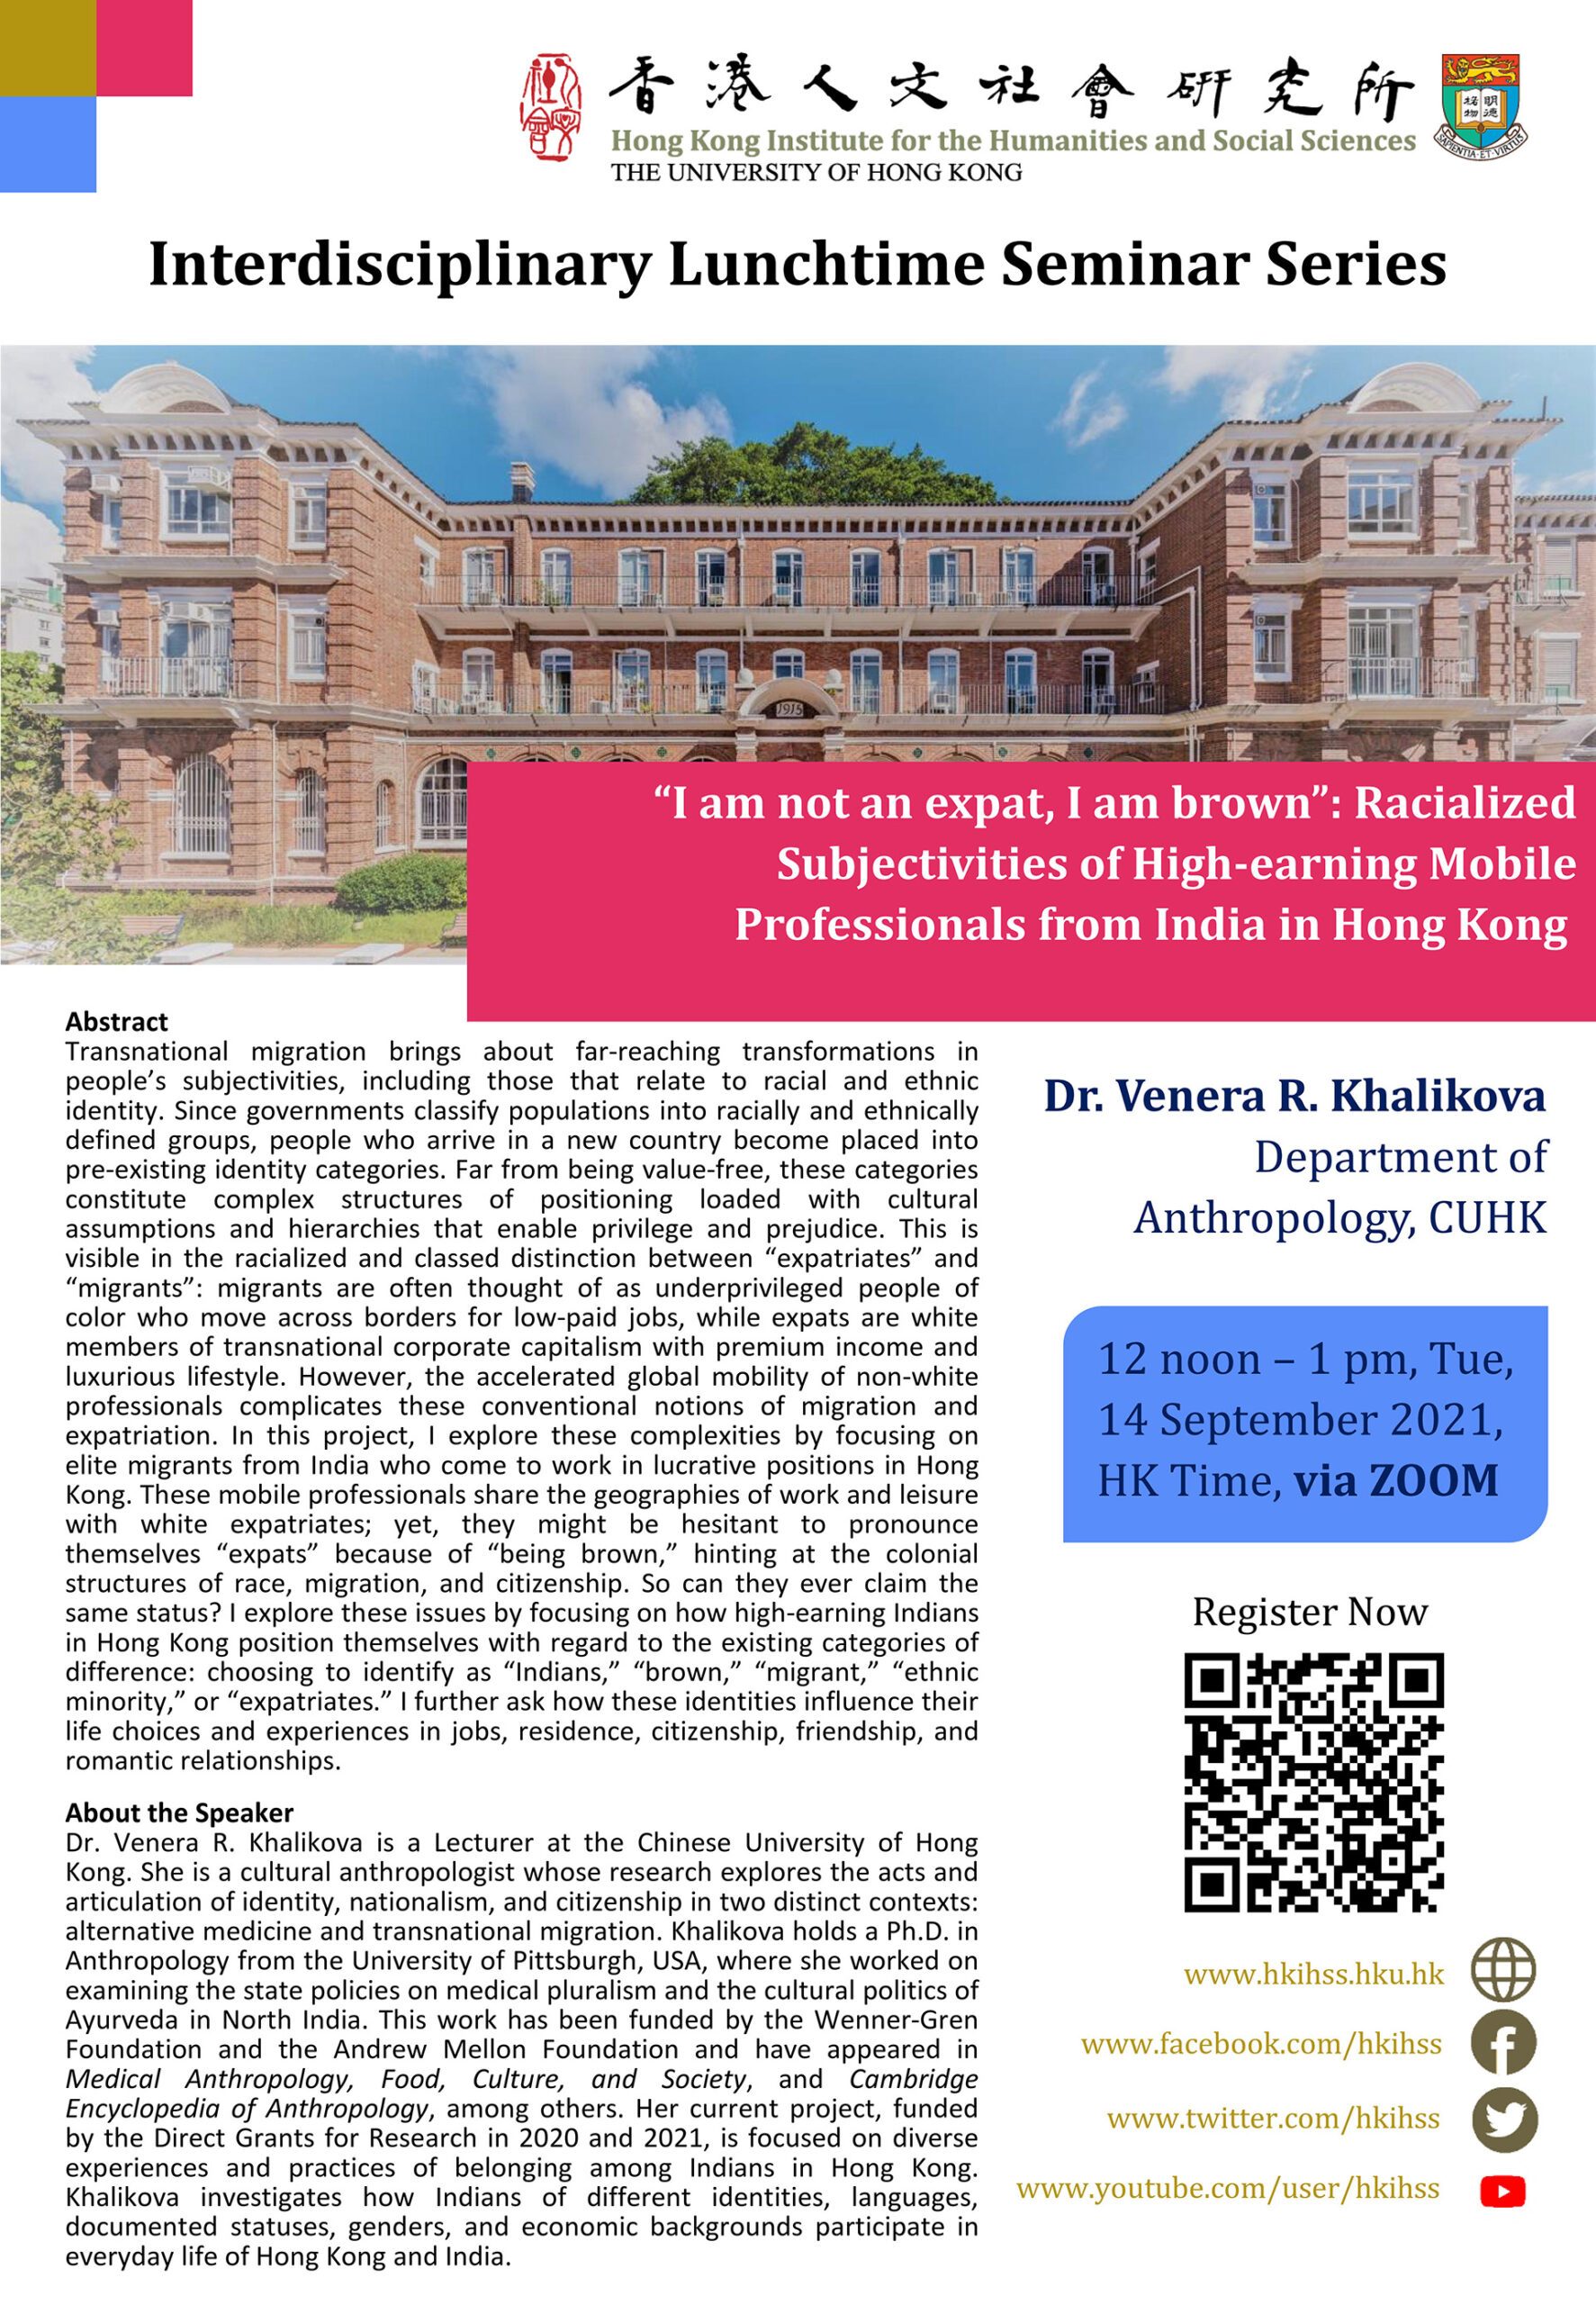 Interdisciplinary Lunchtime Seminar on “'I am not an expat, I am brown': Racialized Subjectivities of High-earning Mobile Professionals from India in Hong Kong” by Dr. Venera R. Khalikova (September 14, 2021)